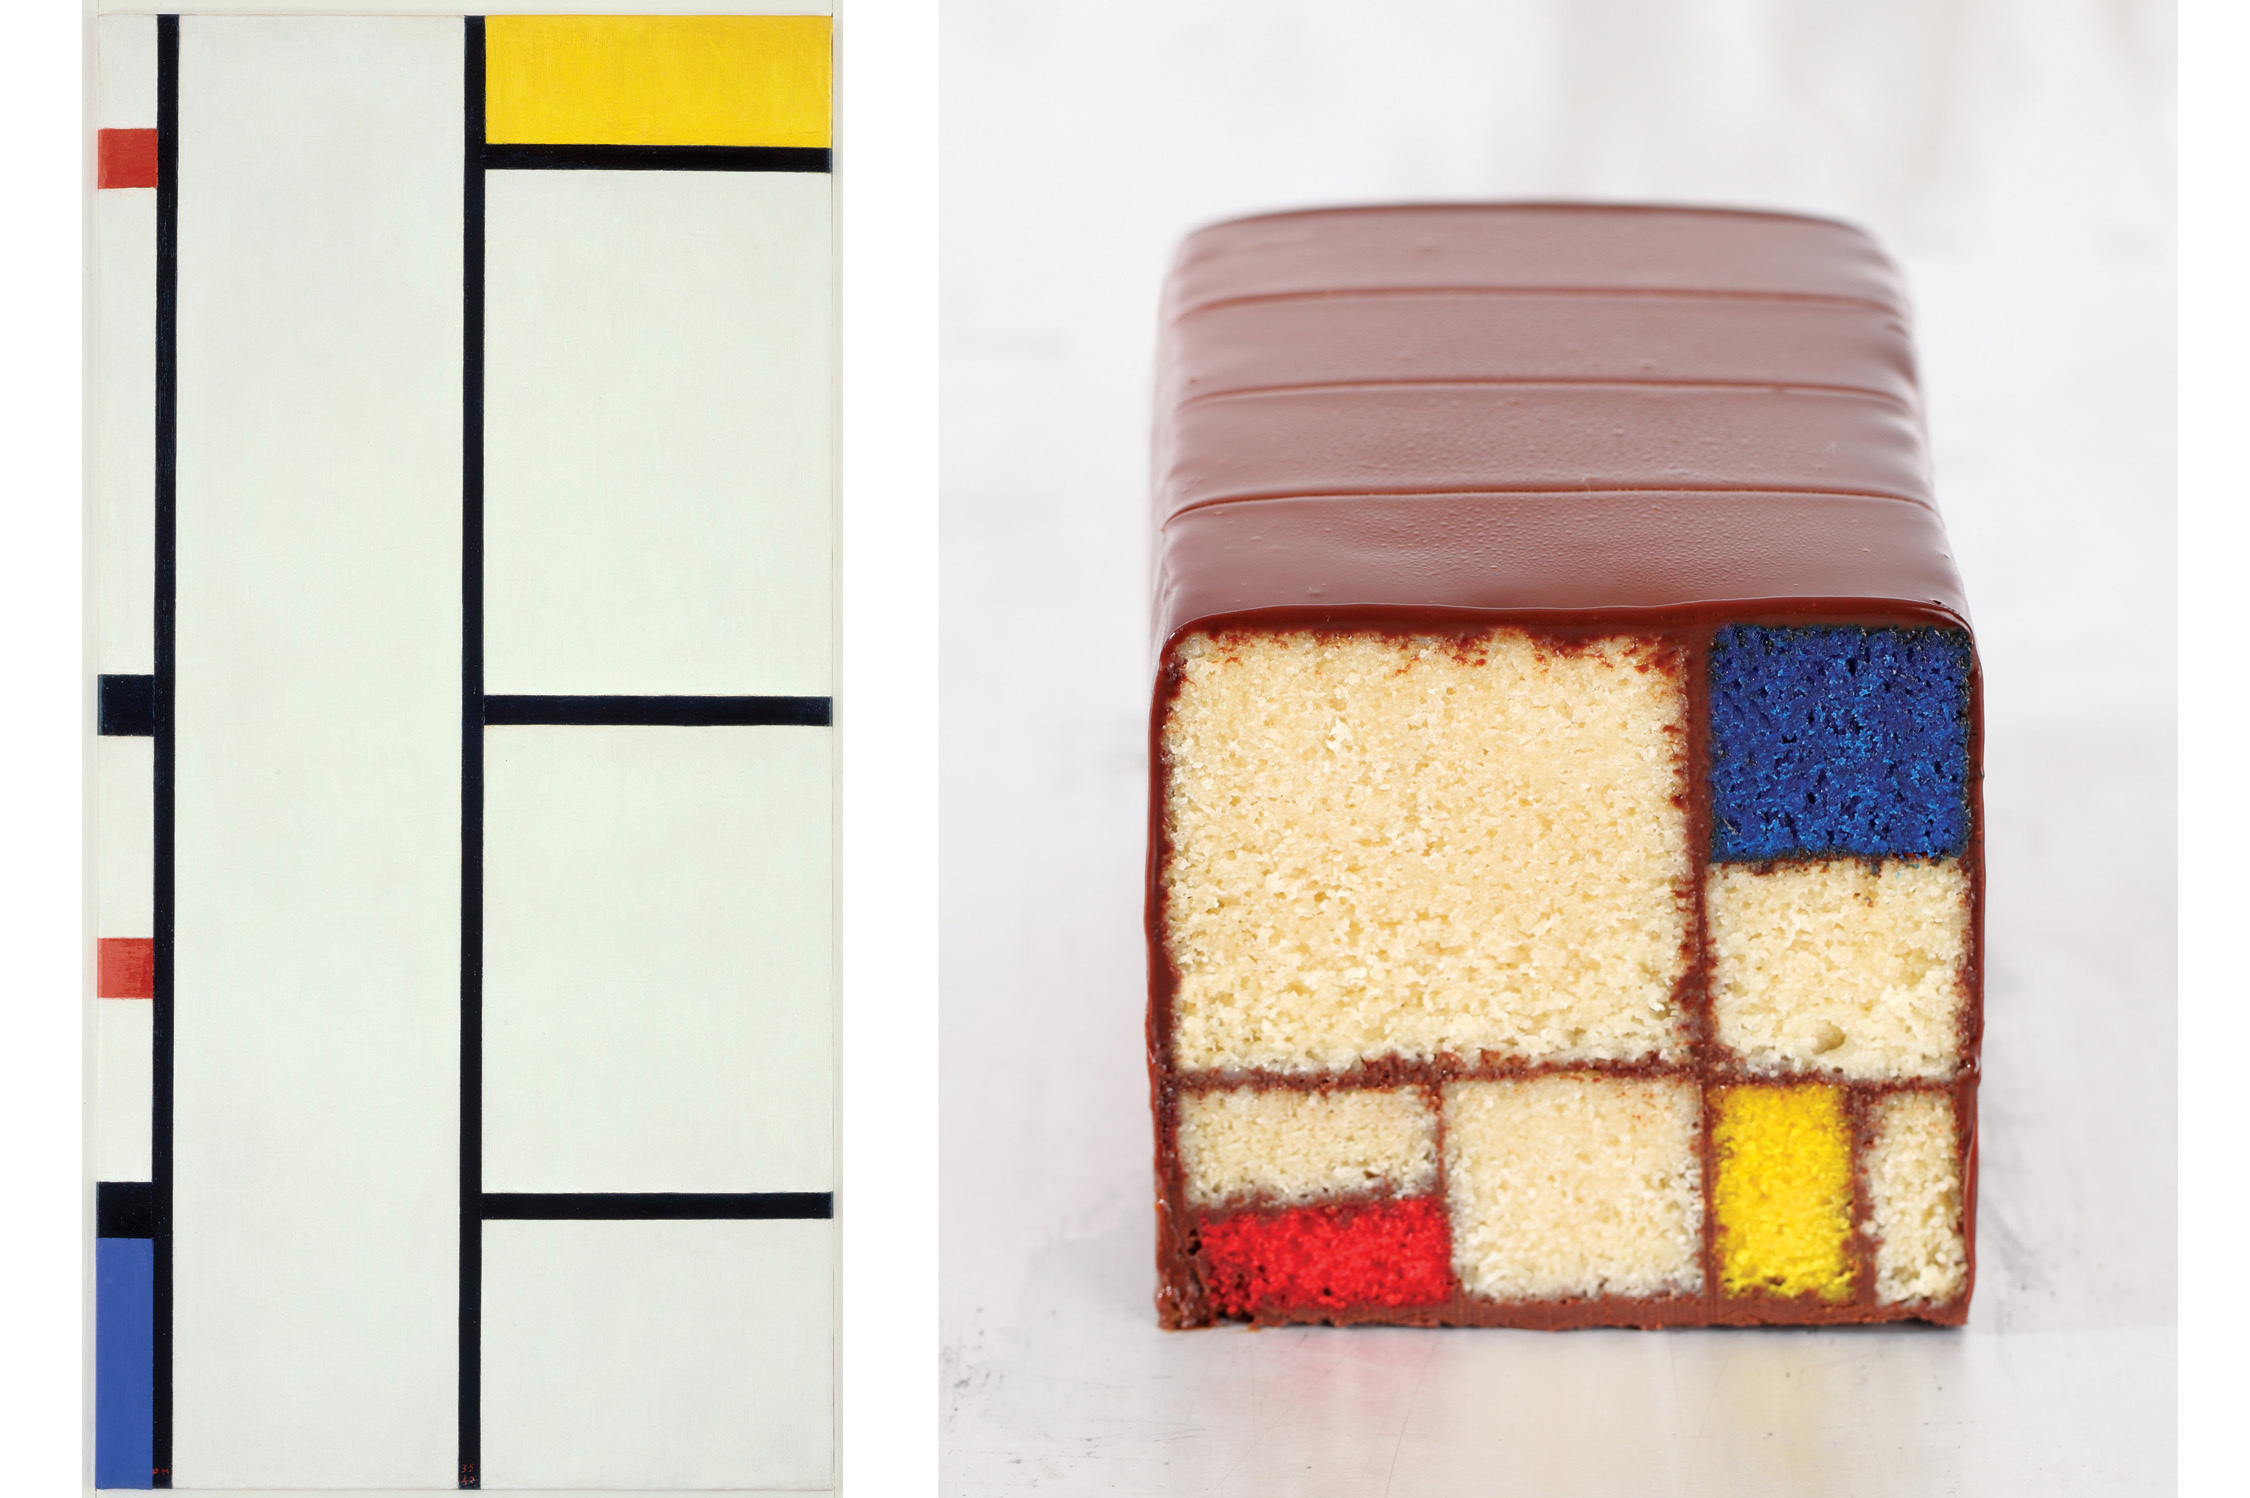 Left: One of Piet Mondrian's grid-like color block compositions. Right: Caitlin Freeman's cake homage.